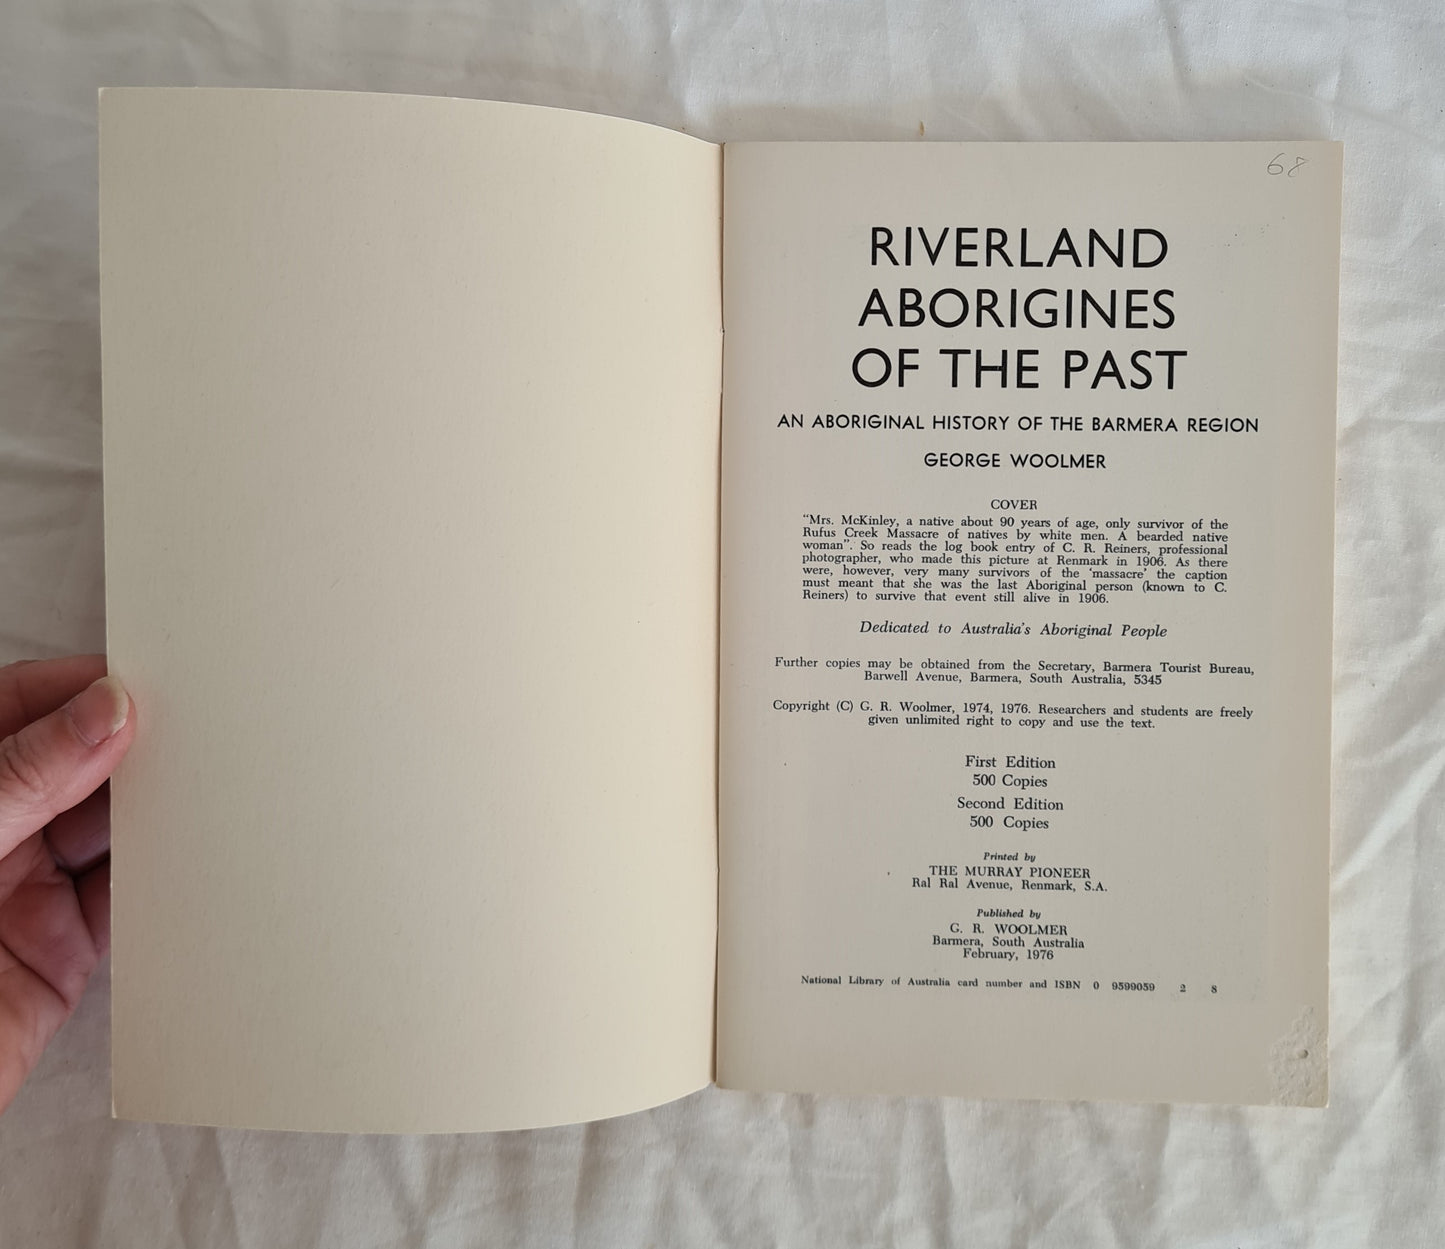 Riverland Aborigines of the Past by George Woolmer